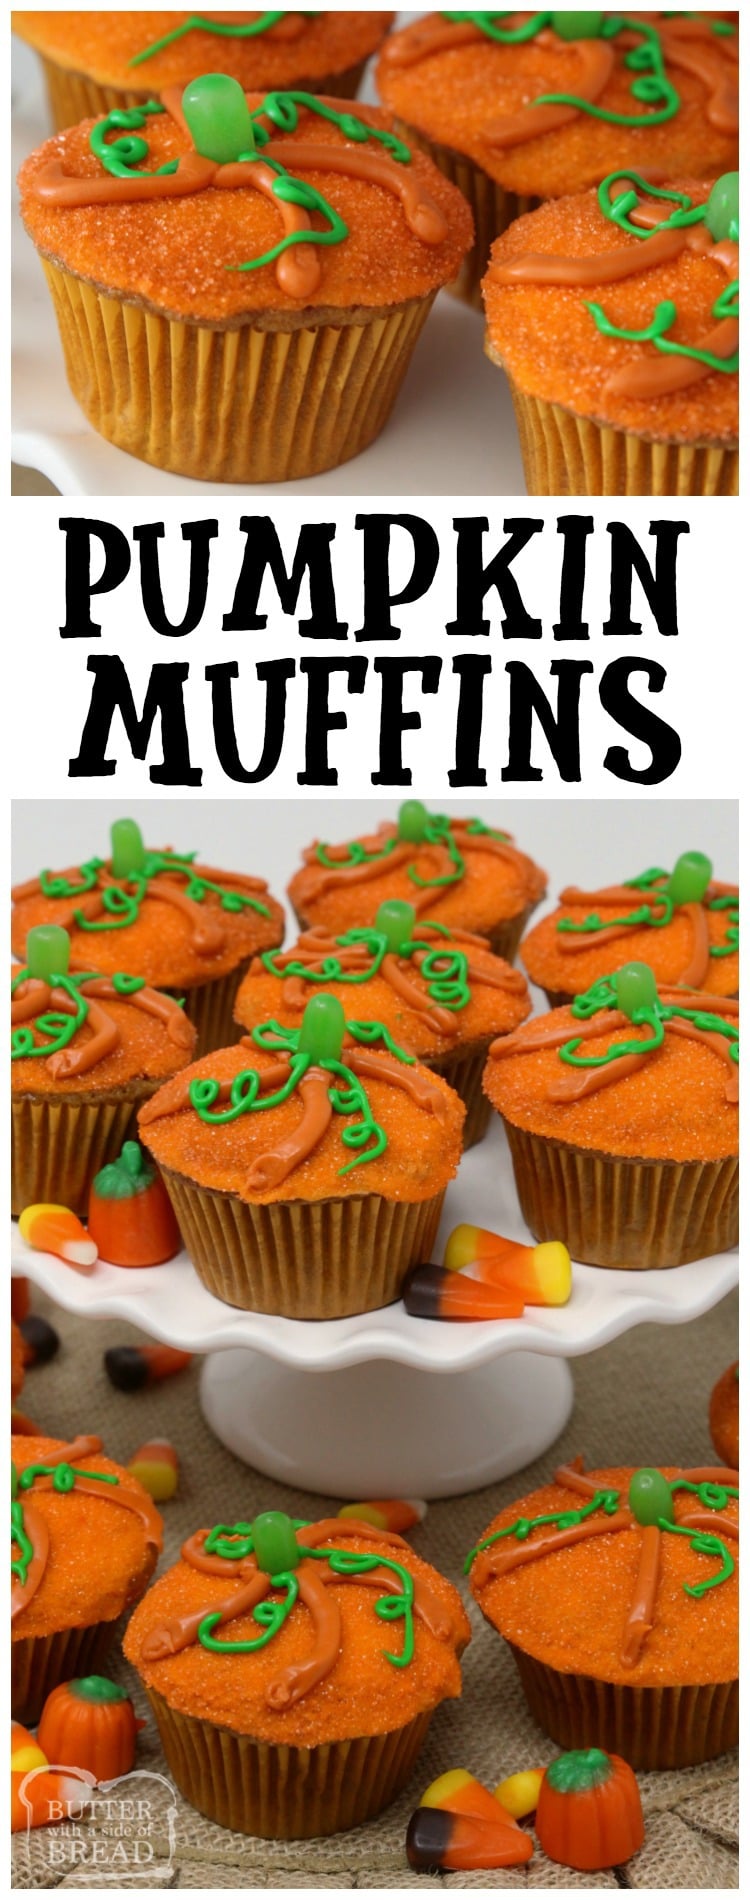 Pumpkin Muffins baked then topped with a simple glaze and orange sprinkles made to look like a cute pumpkin! Great pumpkin spice flavor & festive too!  Easy #pumpkin #muffin recipe from Butter With A Side of Bread